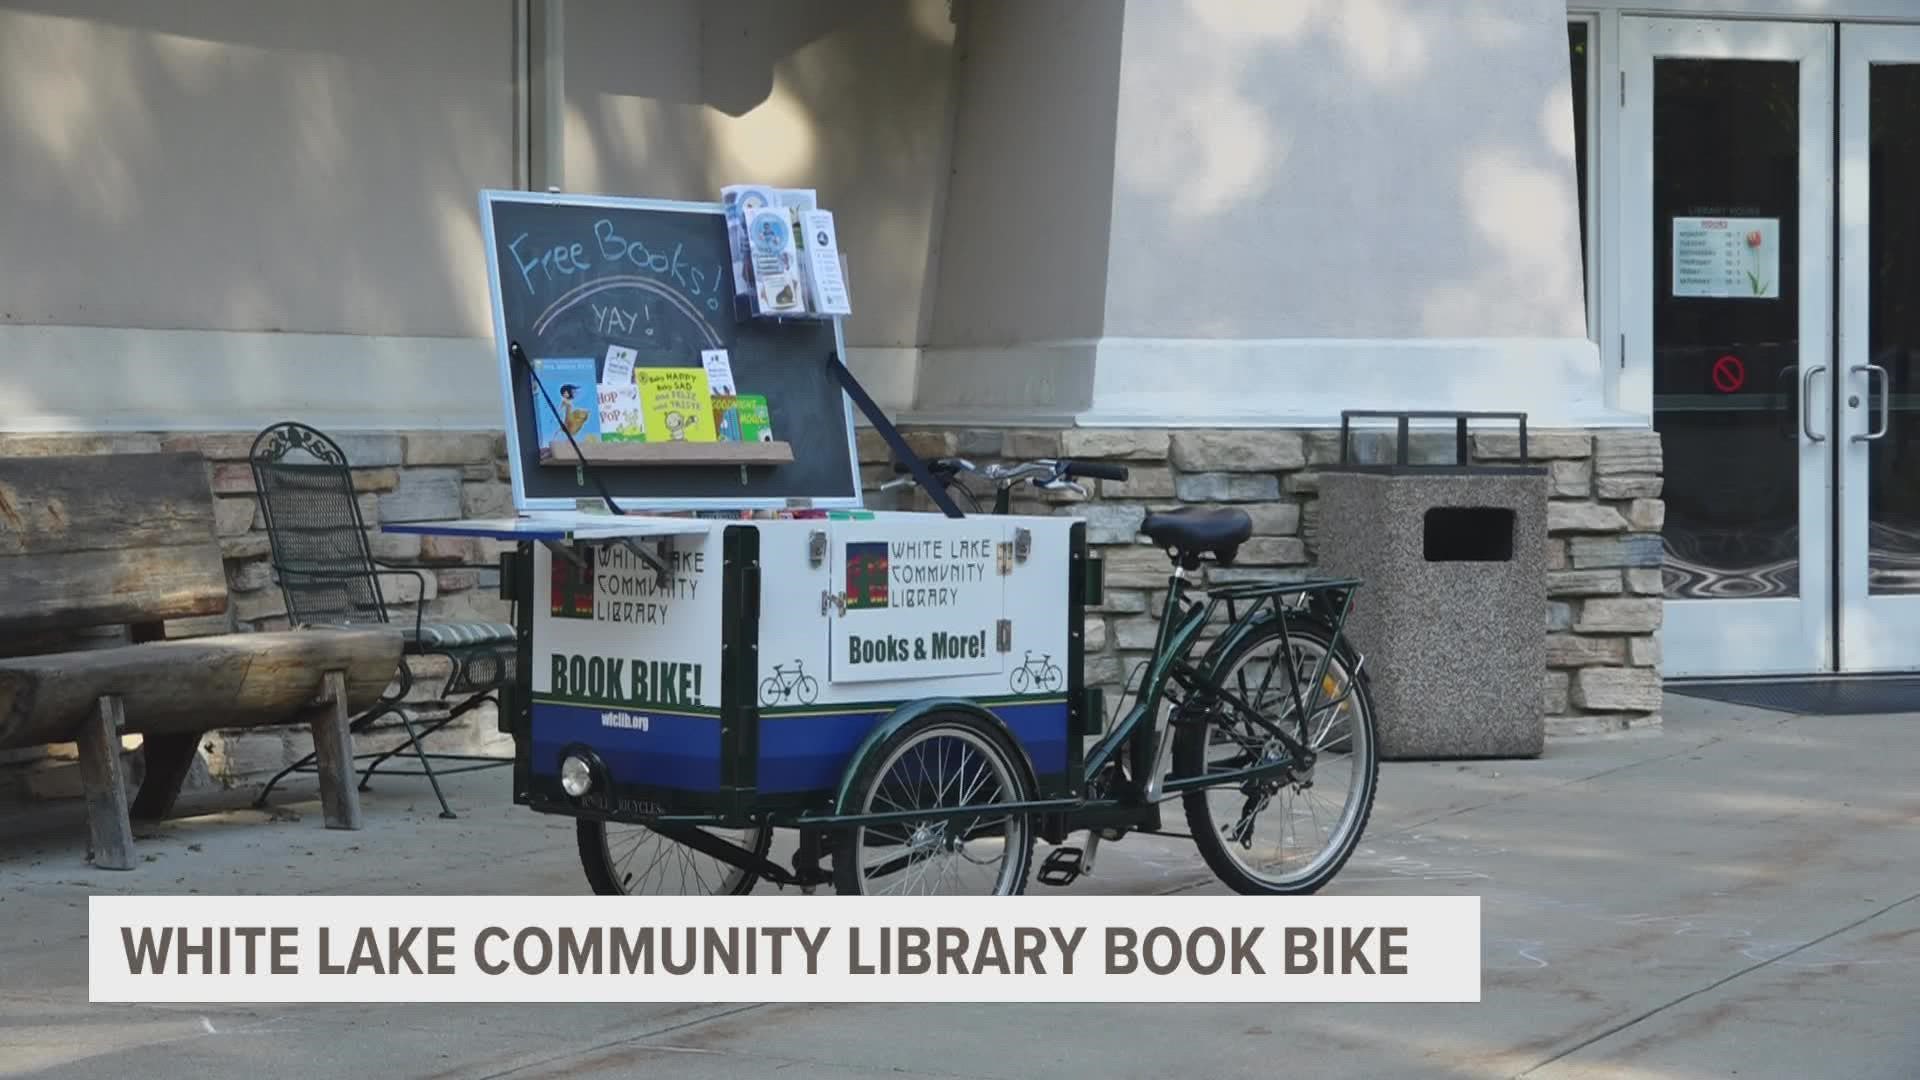 The White Lake Community Library is bringing the joy and fun of reading to residents with a library on three wheels.